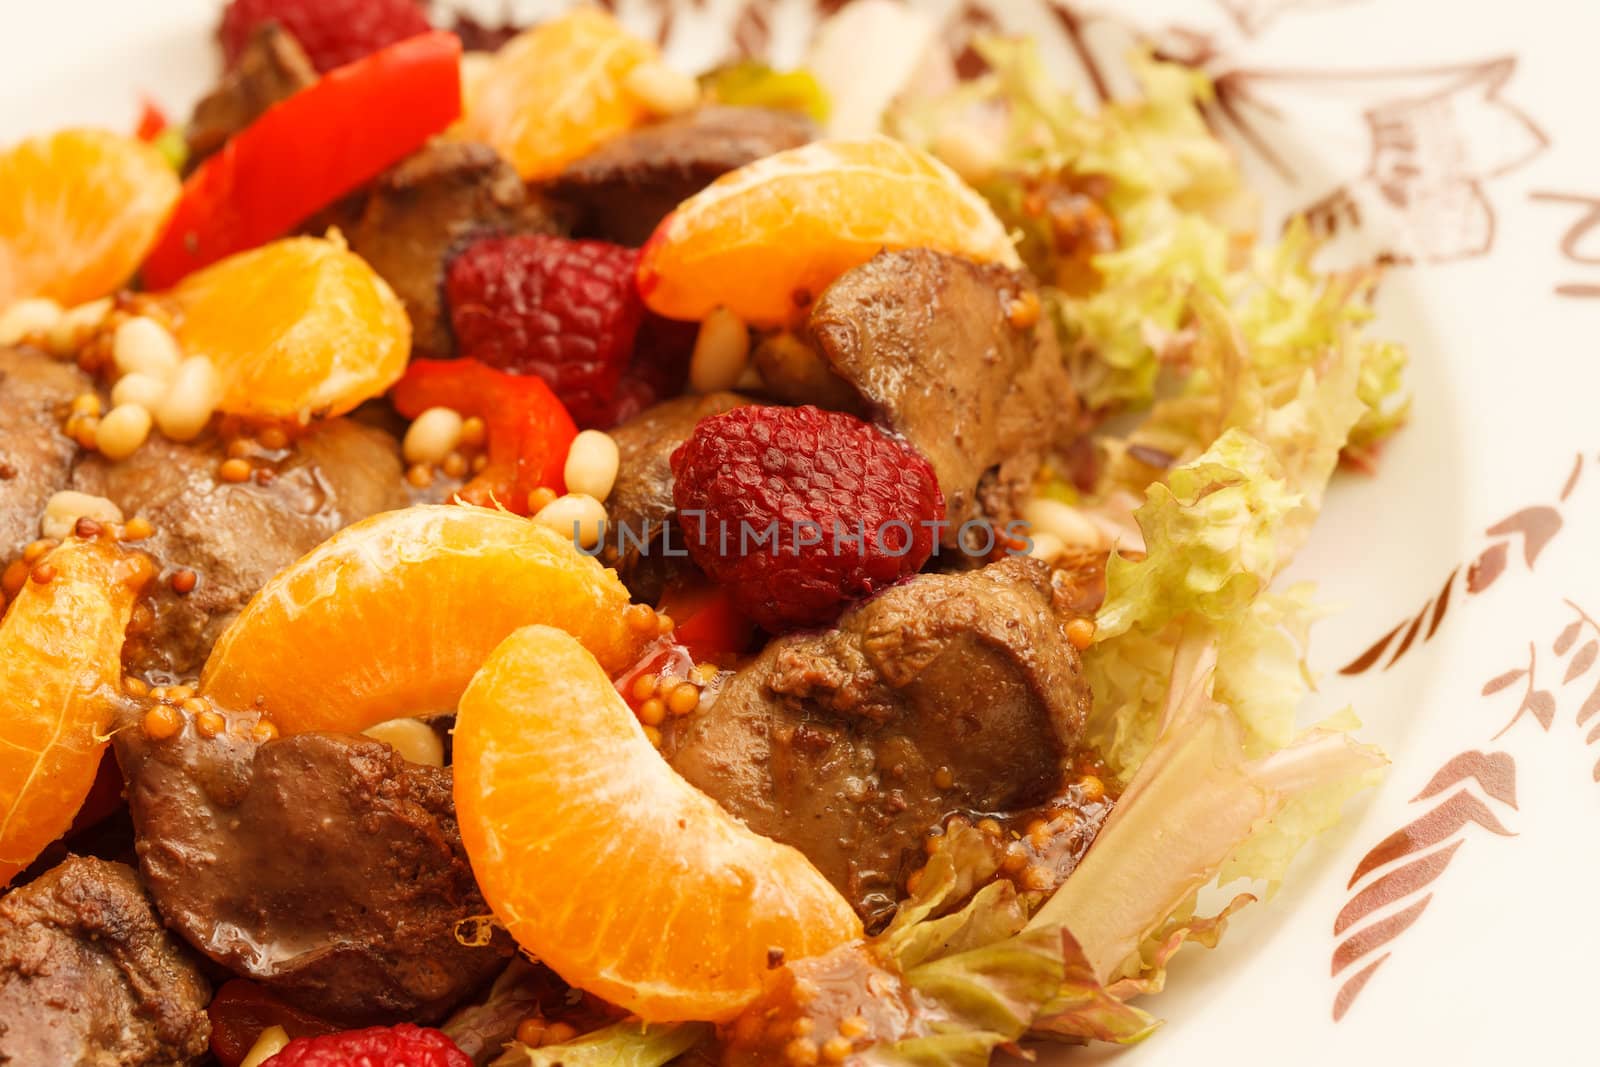 chicken liver with fruits by shebeko